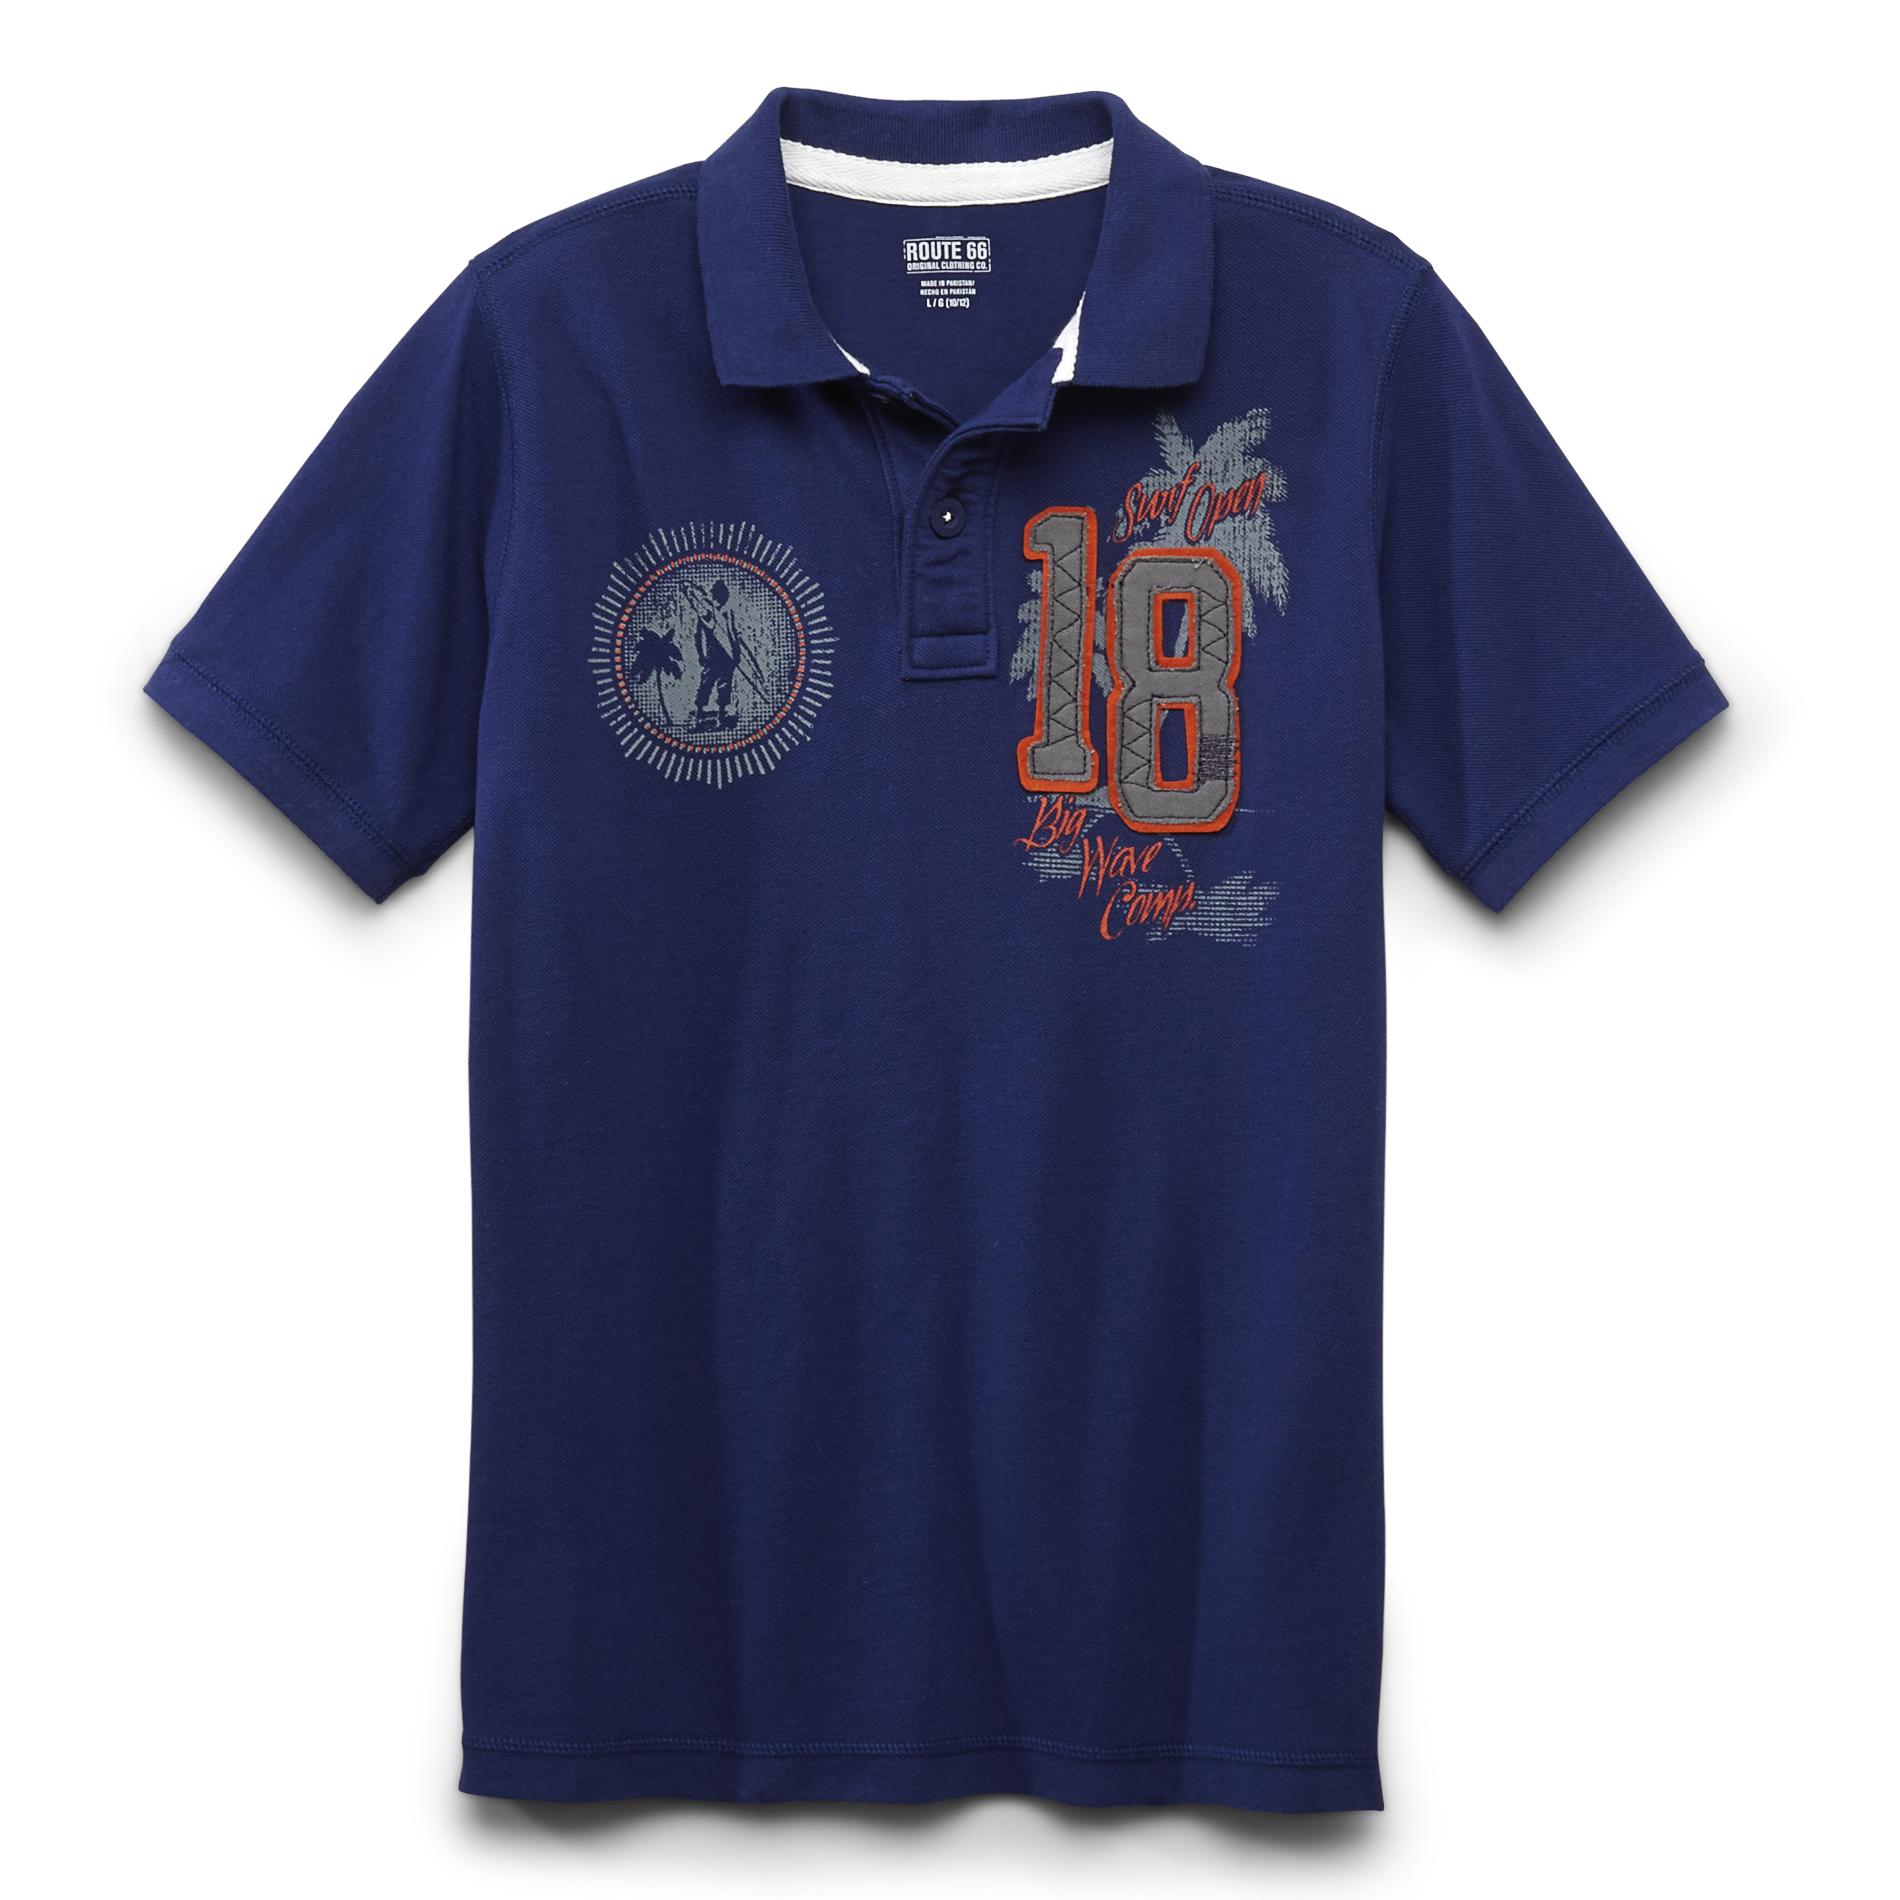 Route 66 Boy's Graphic Polo Shirt - Surf Open